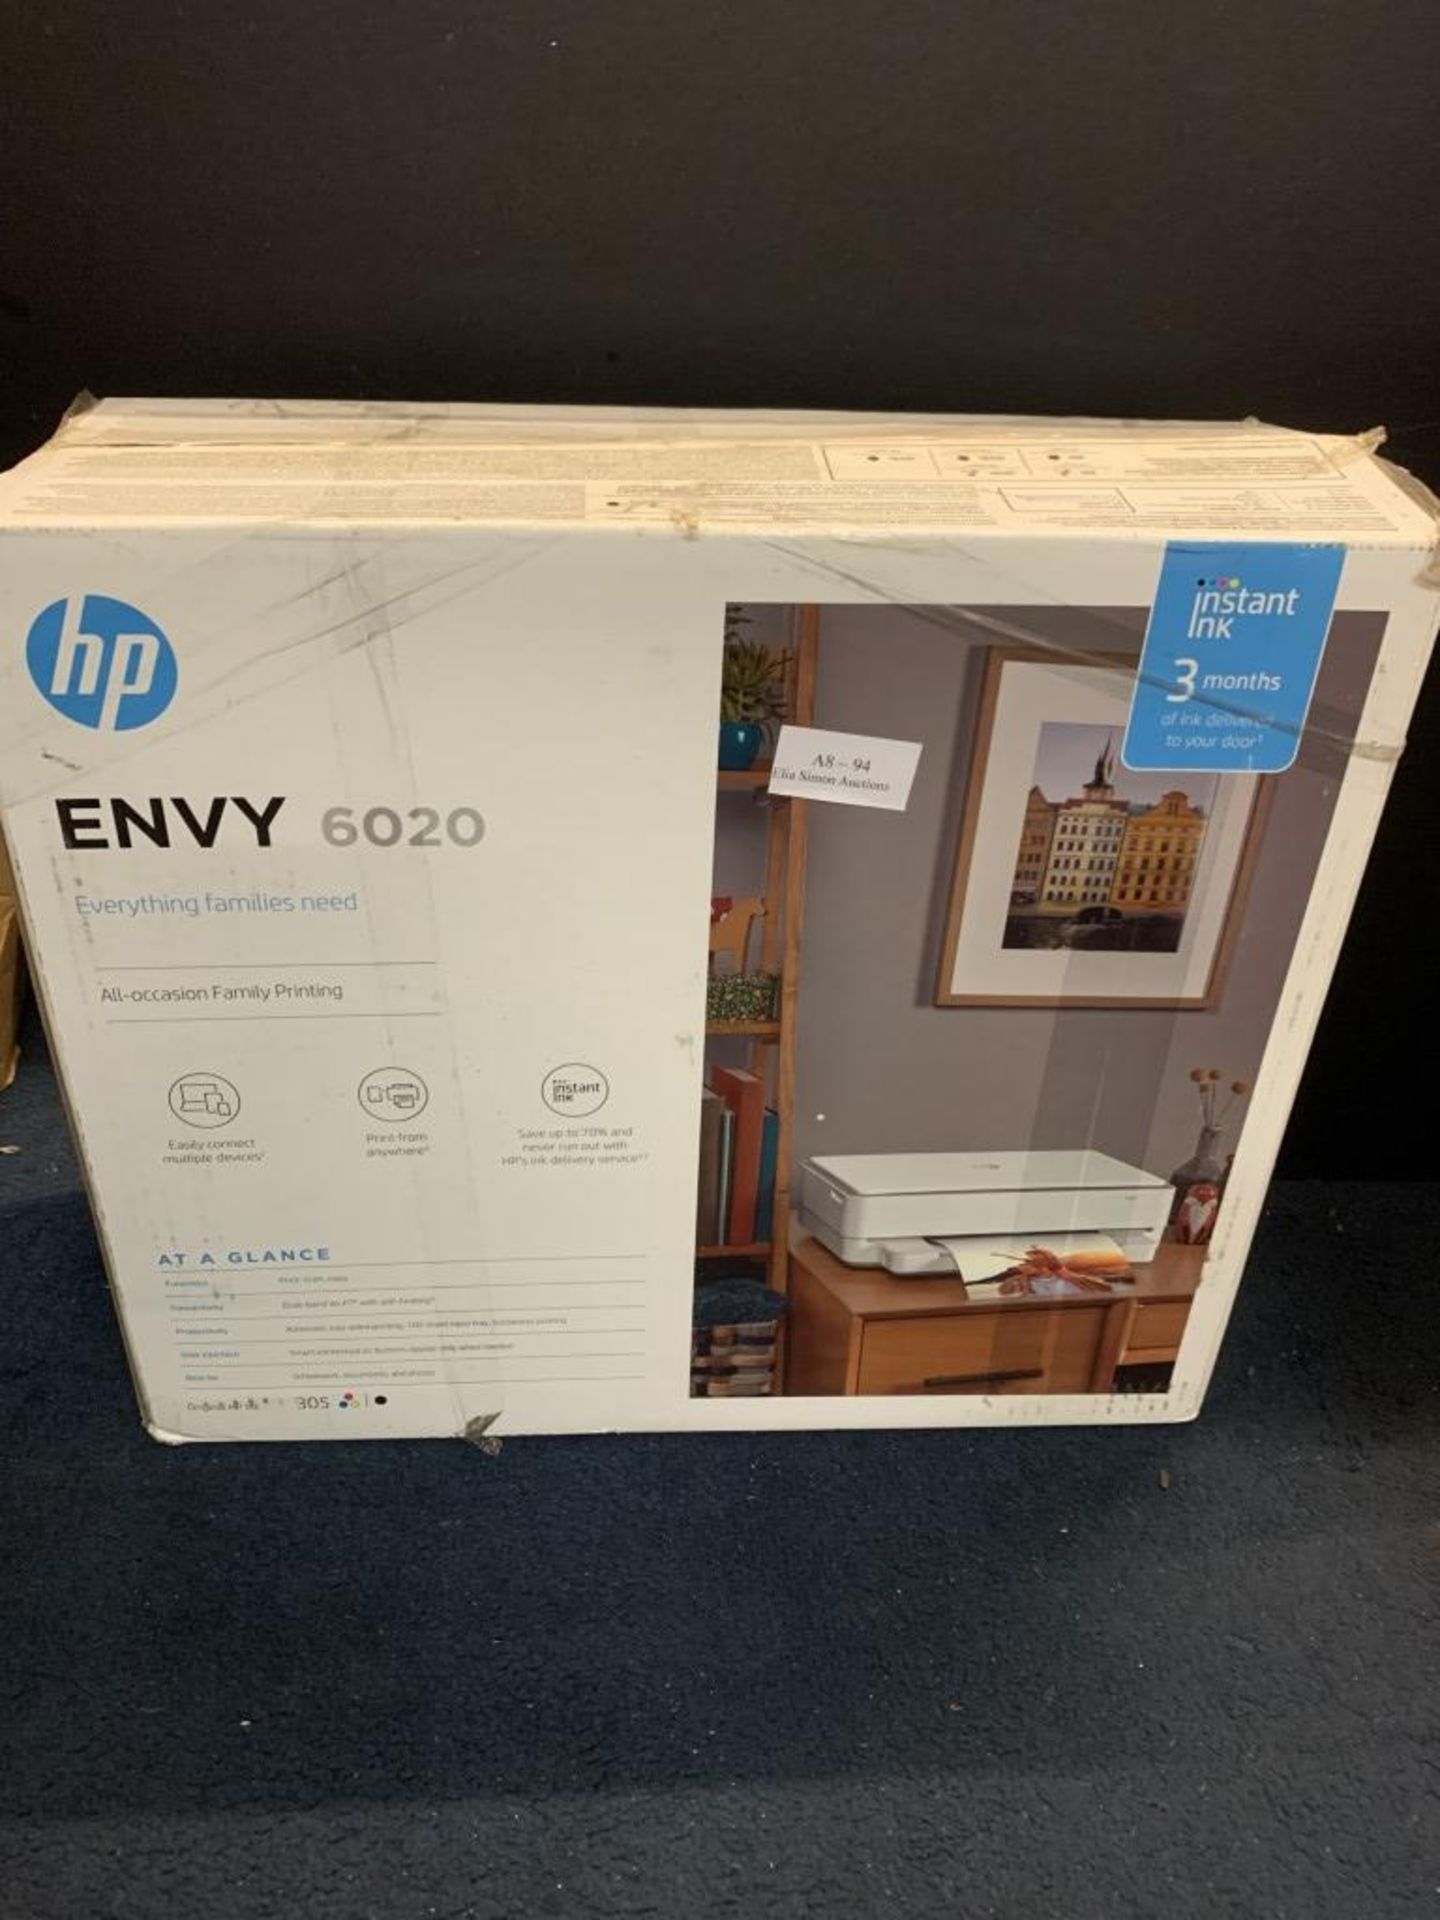 HP ENVY 6020 All-in-One Printer with Wireless Printing, Instant Ink with 3 Months Trial, White - Image 2 of 2